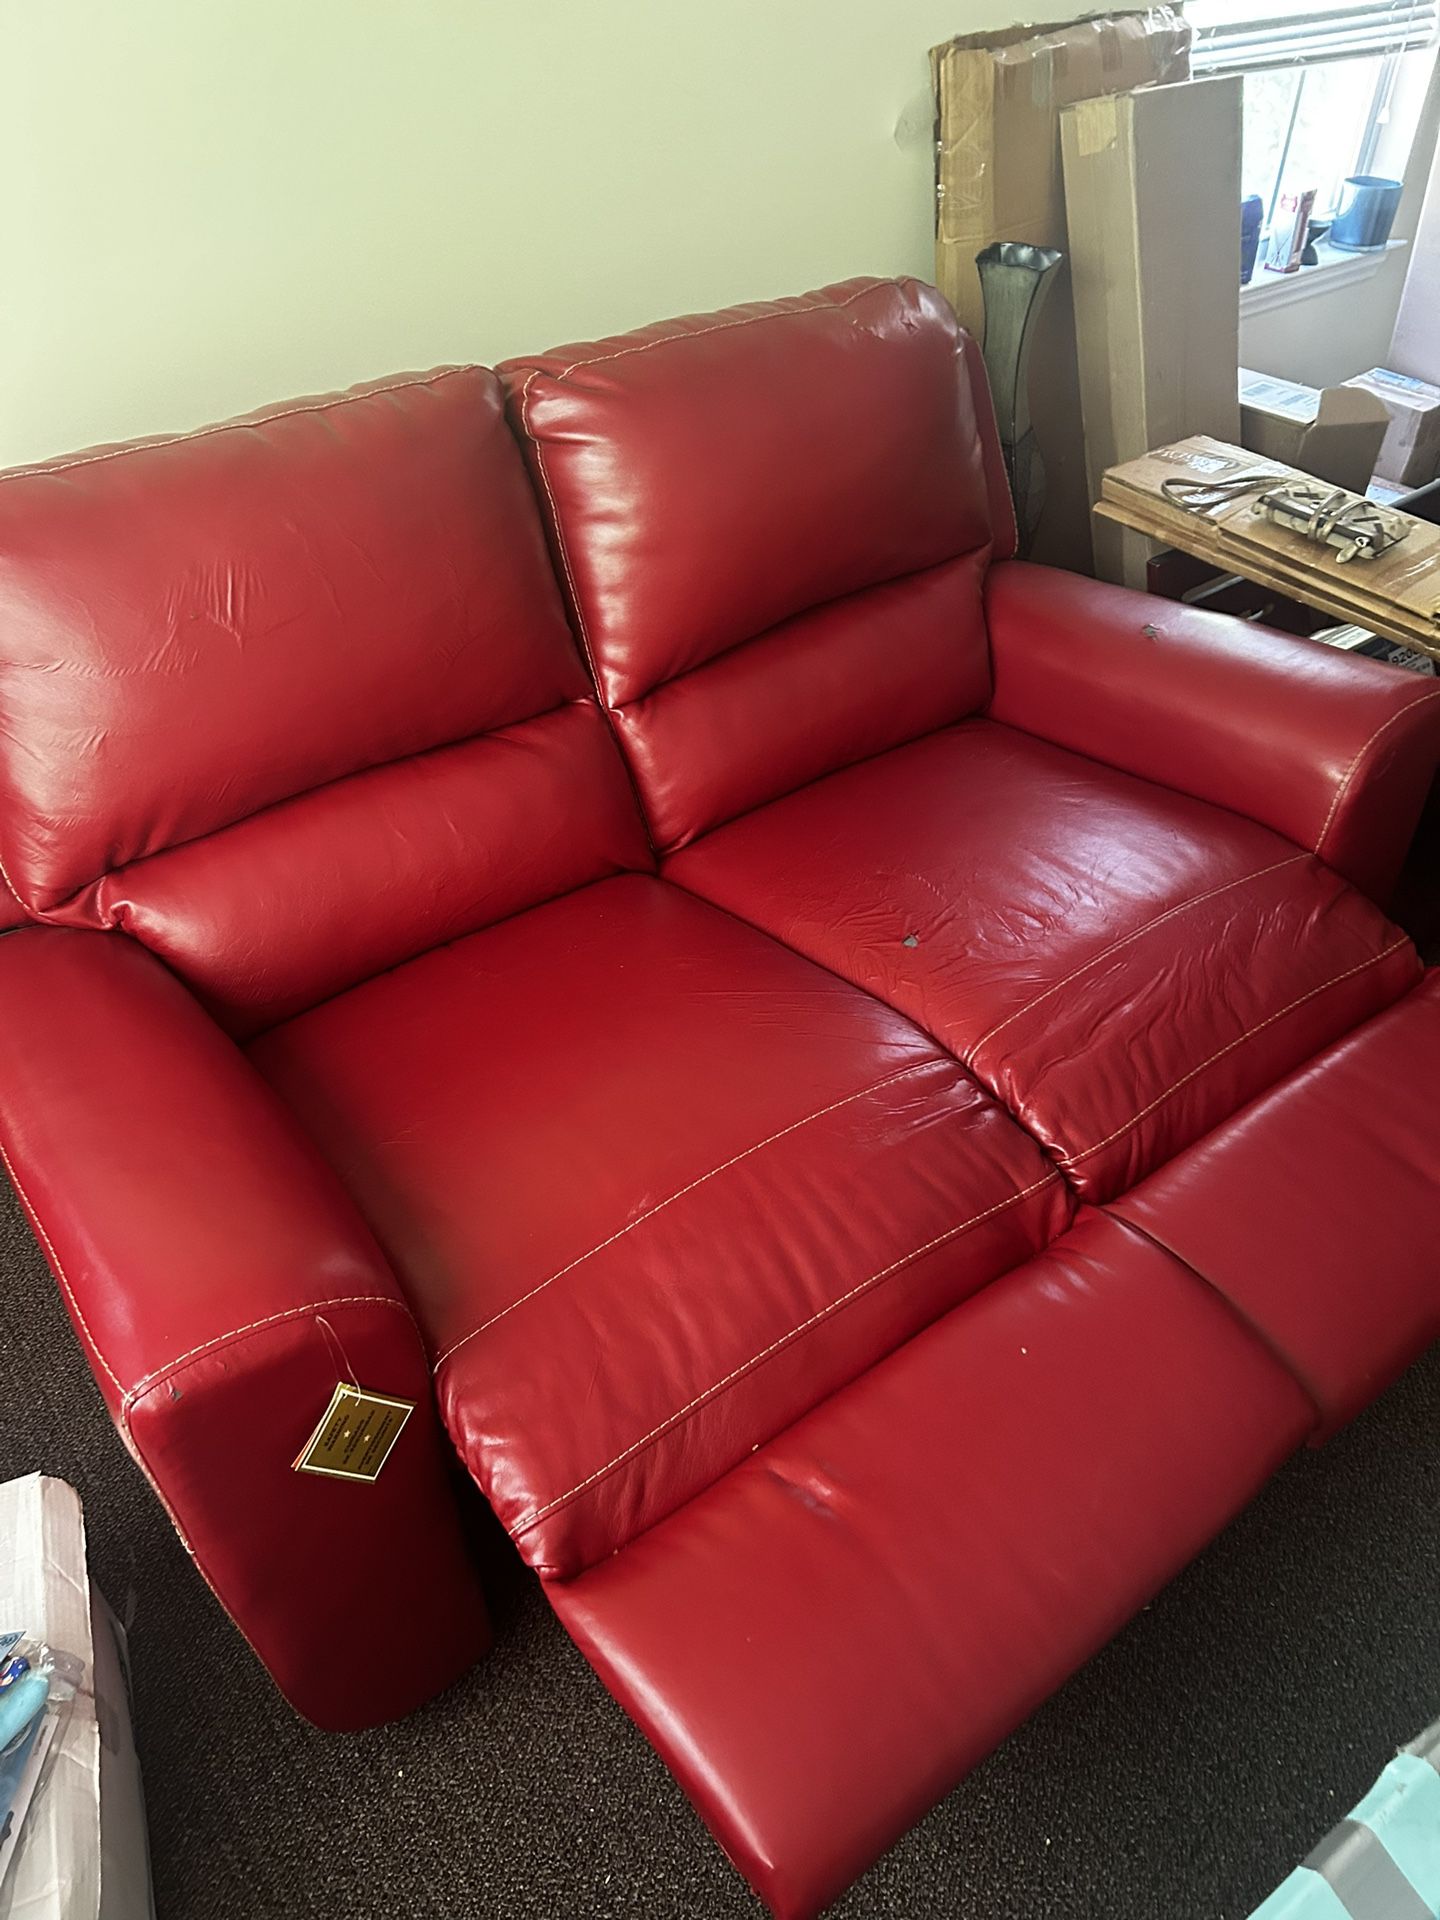 Red Recliner Love seat